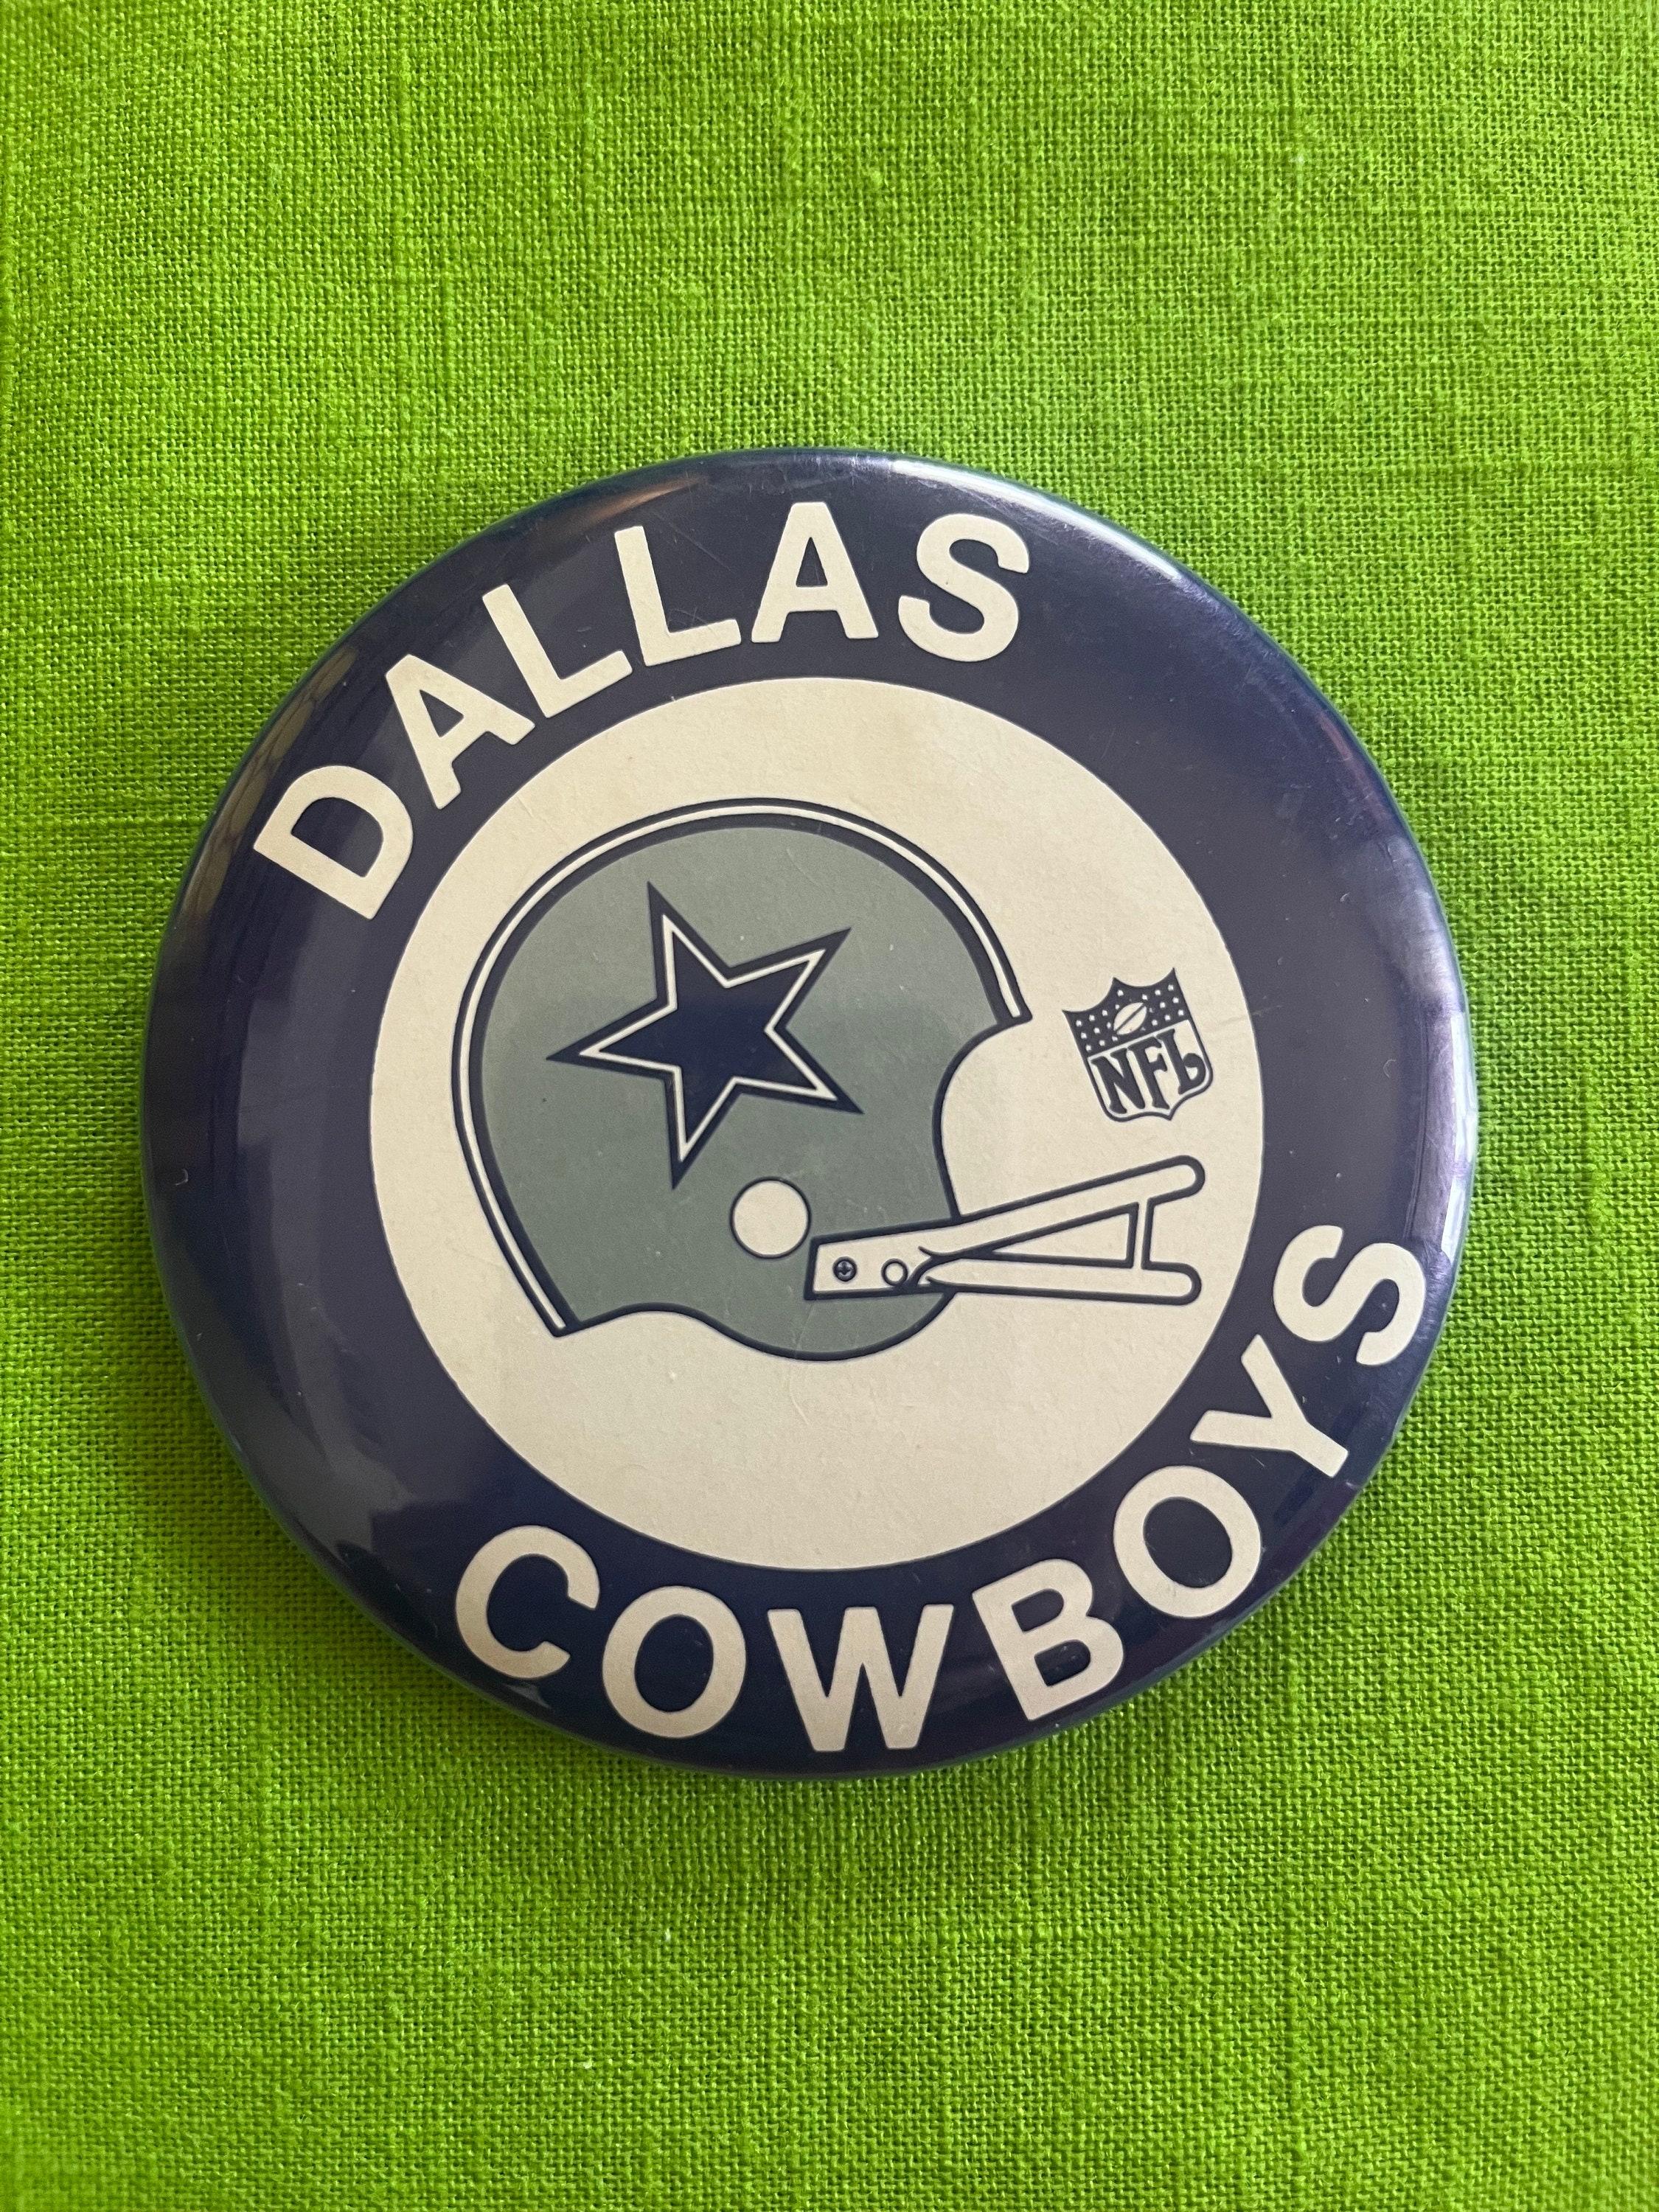 Dallas Cowboys, Badge ID Holder, Fabric Covered Button Badge ID